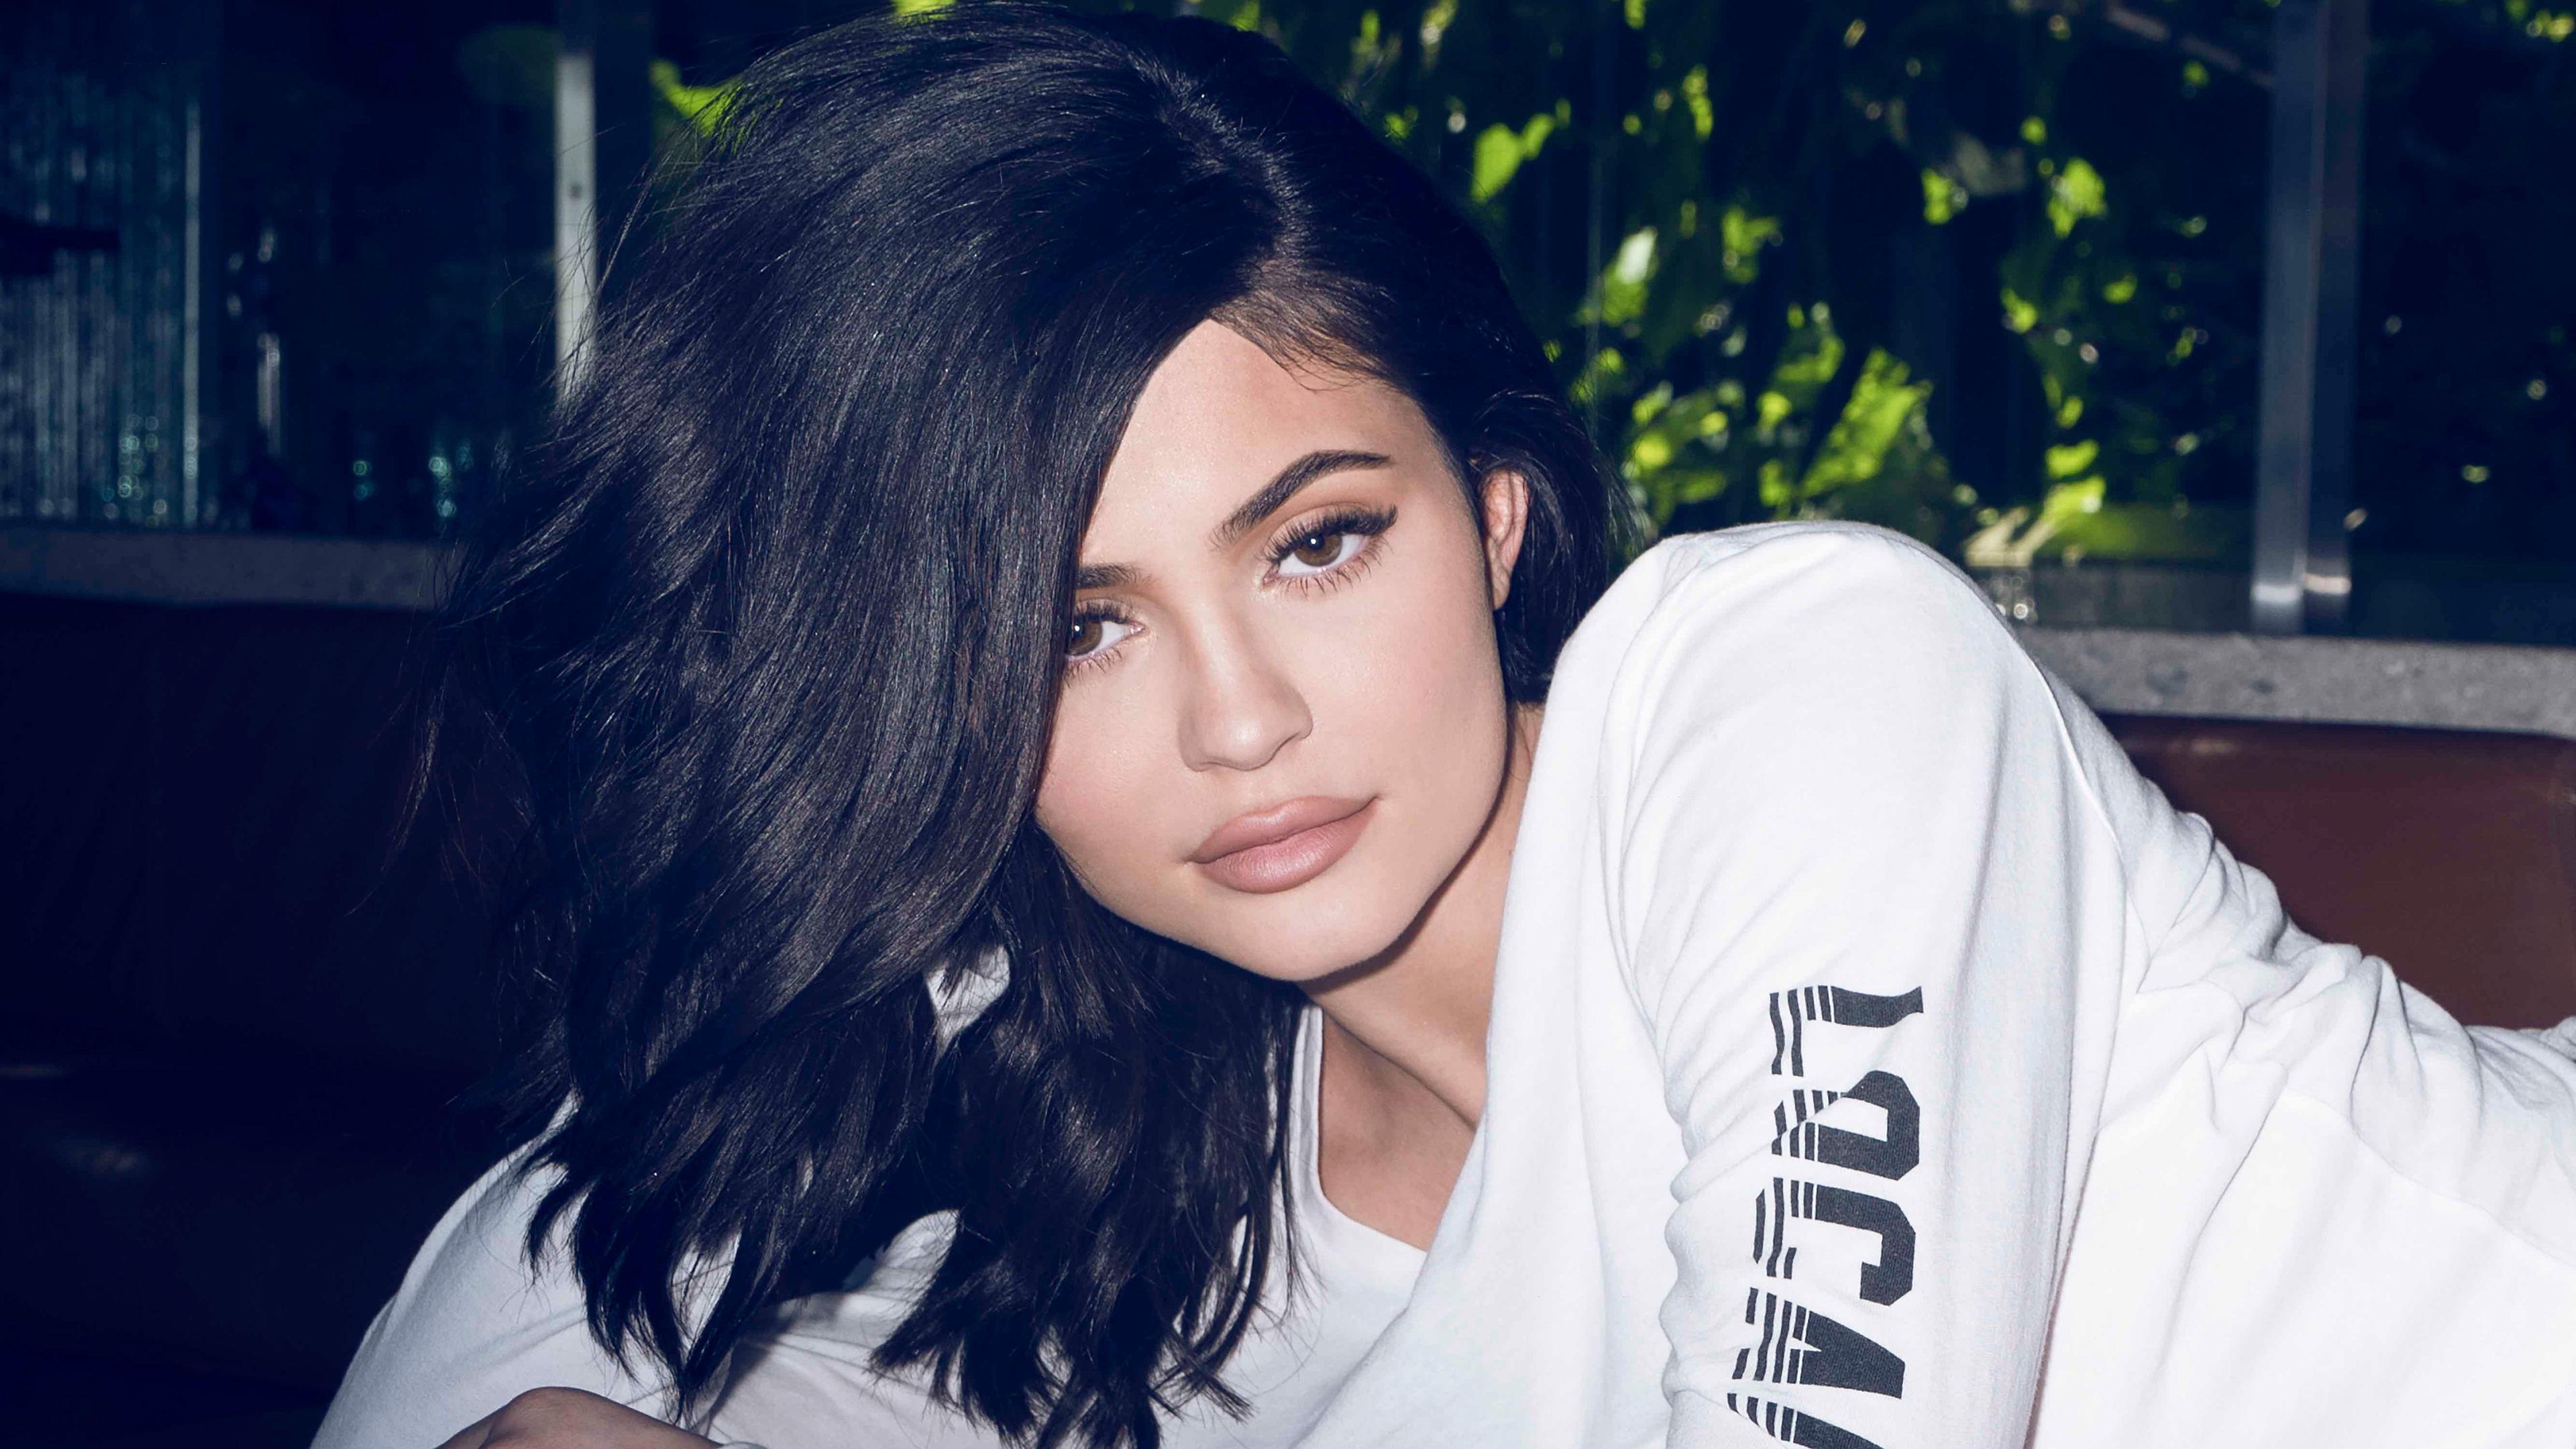 Aggregate more than 68 kylie jenner wallpapers best - in.cdgdbentre